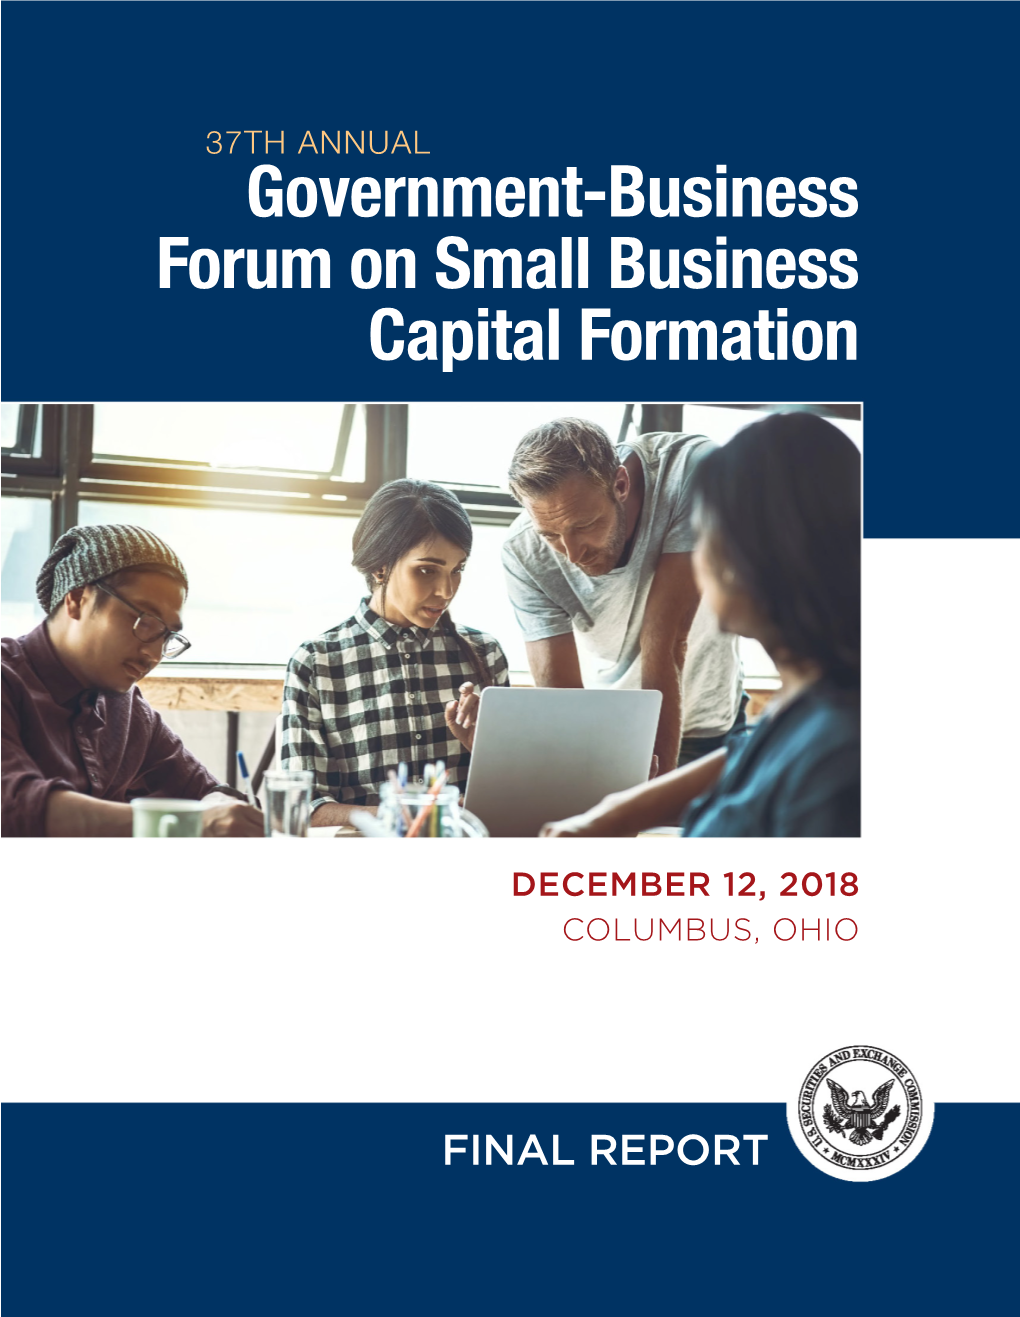 Small Business Forum Outside of Washington, D.C